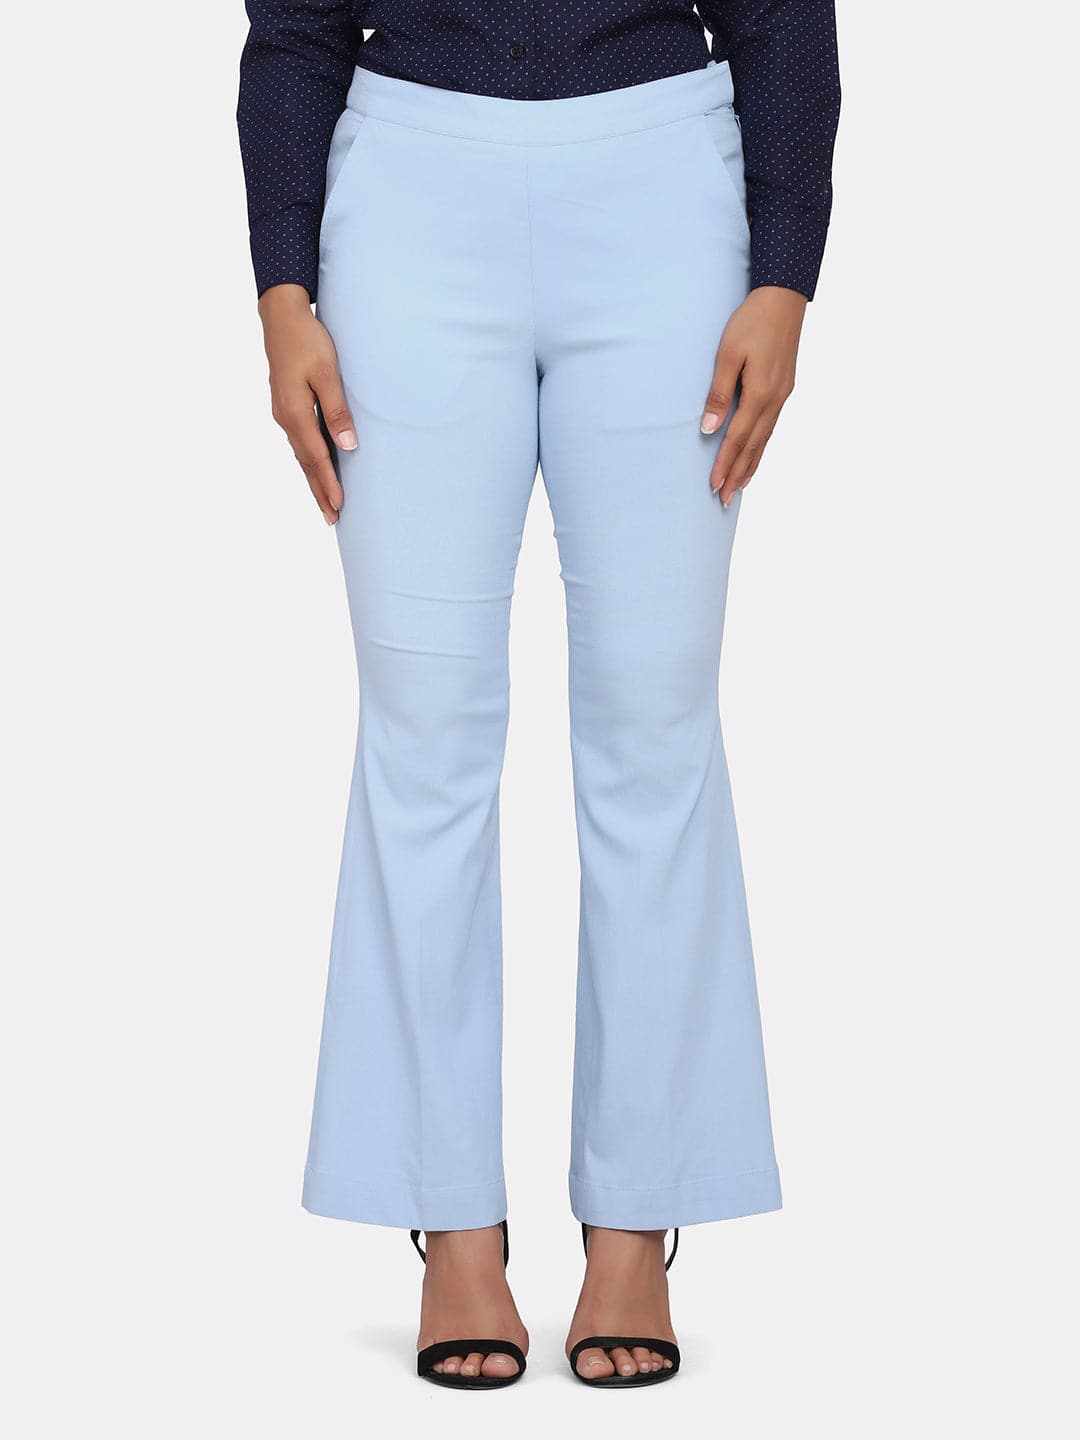 Regular Fit Pants Cotton Bell Bottom Palazzo, Waist Size: 32.0 at Rs 425 in  New Delhi